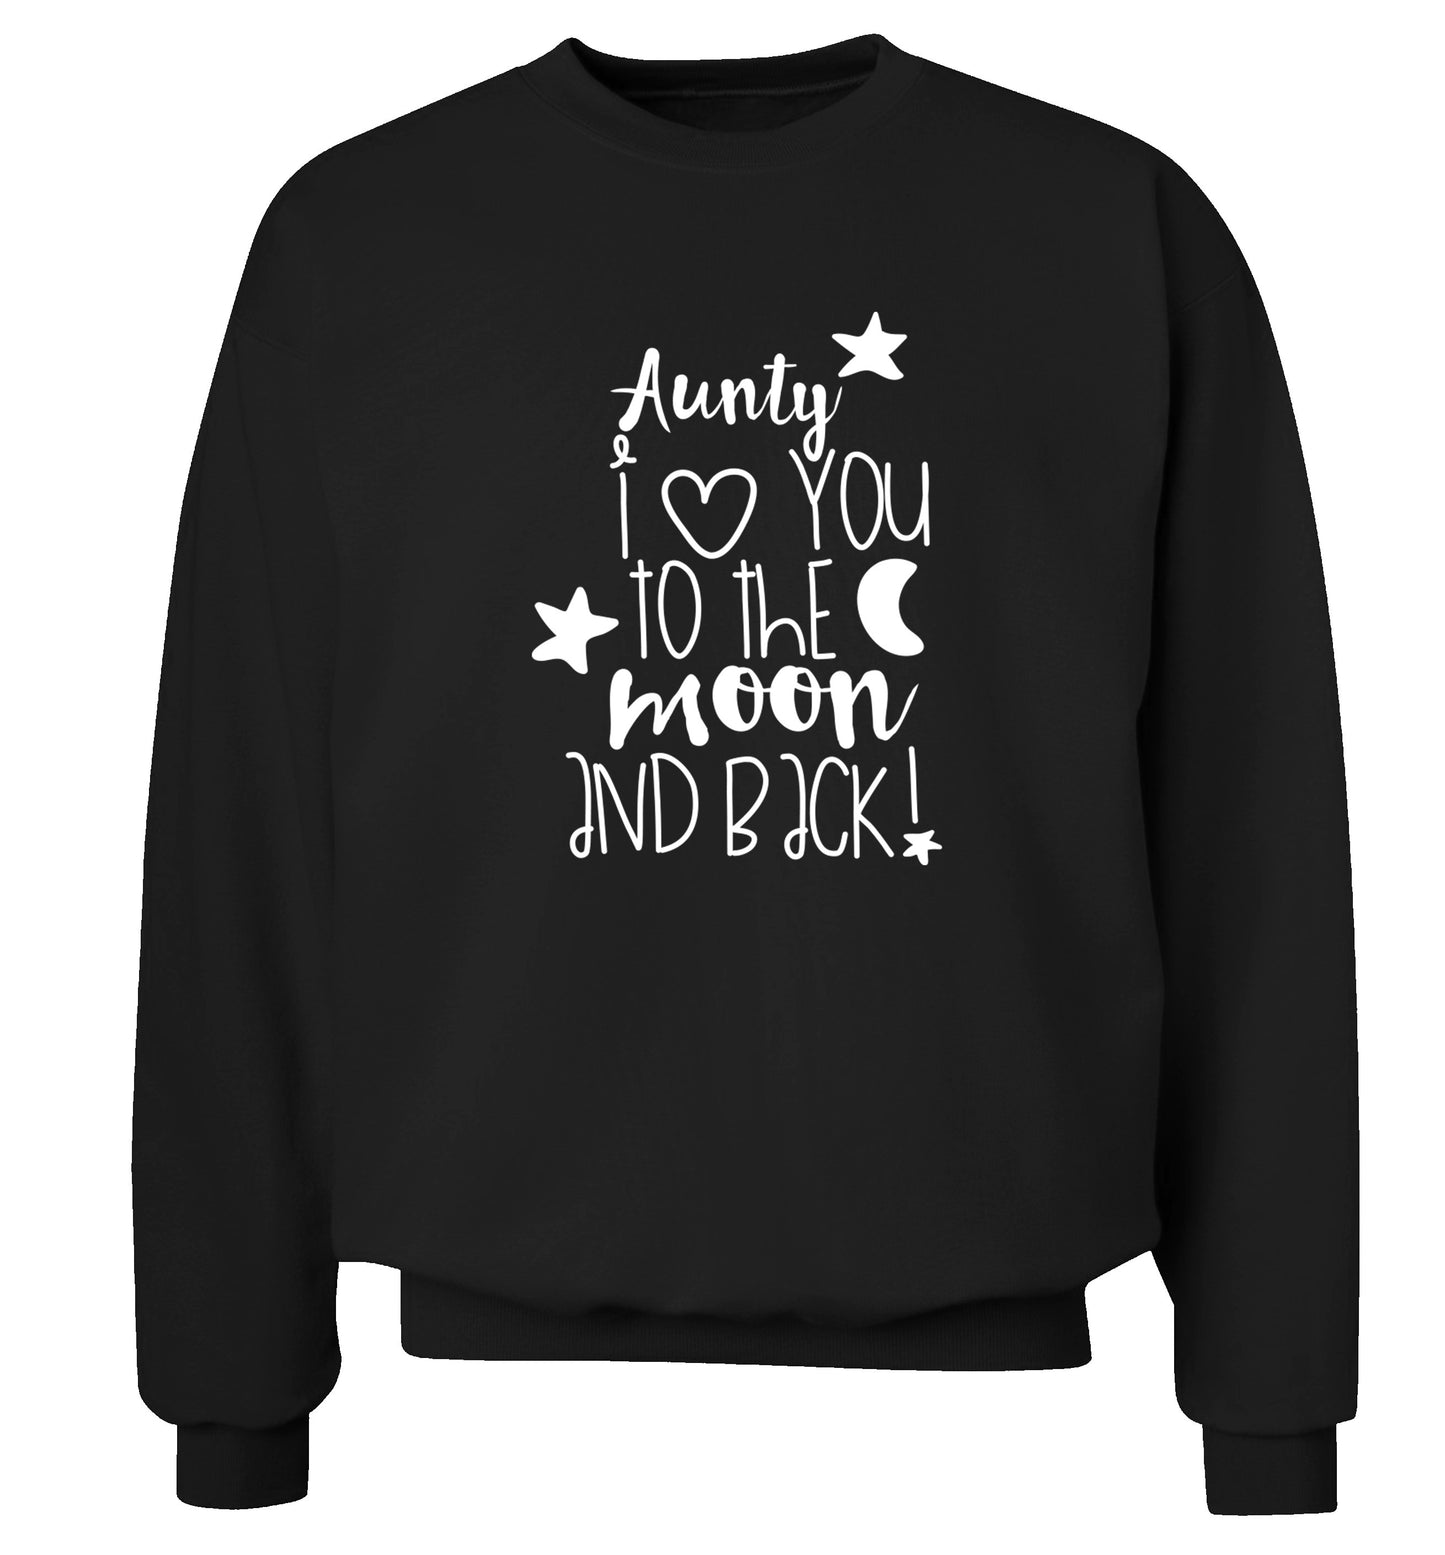 Aunty I love you to the moon and back Adult's unisex black  sweater 2XL